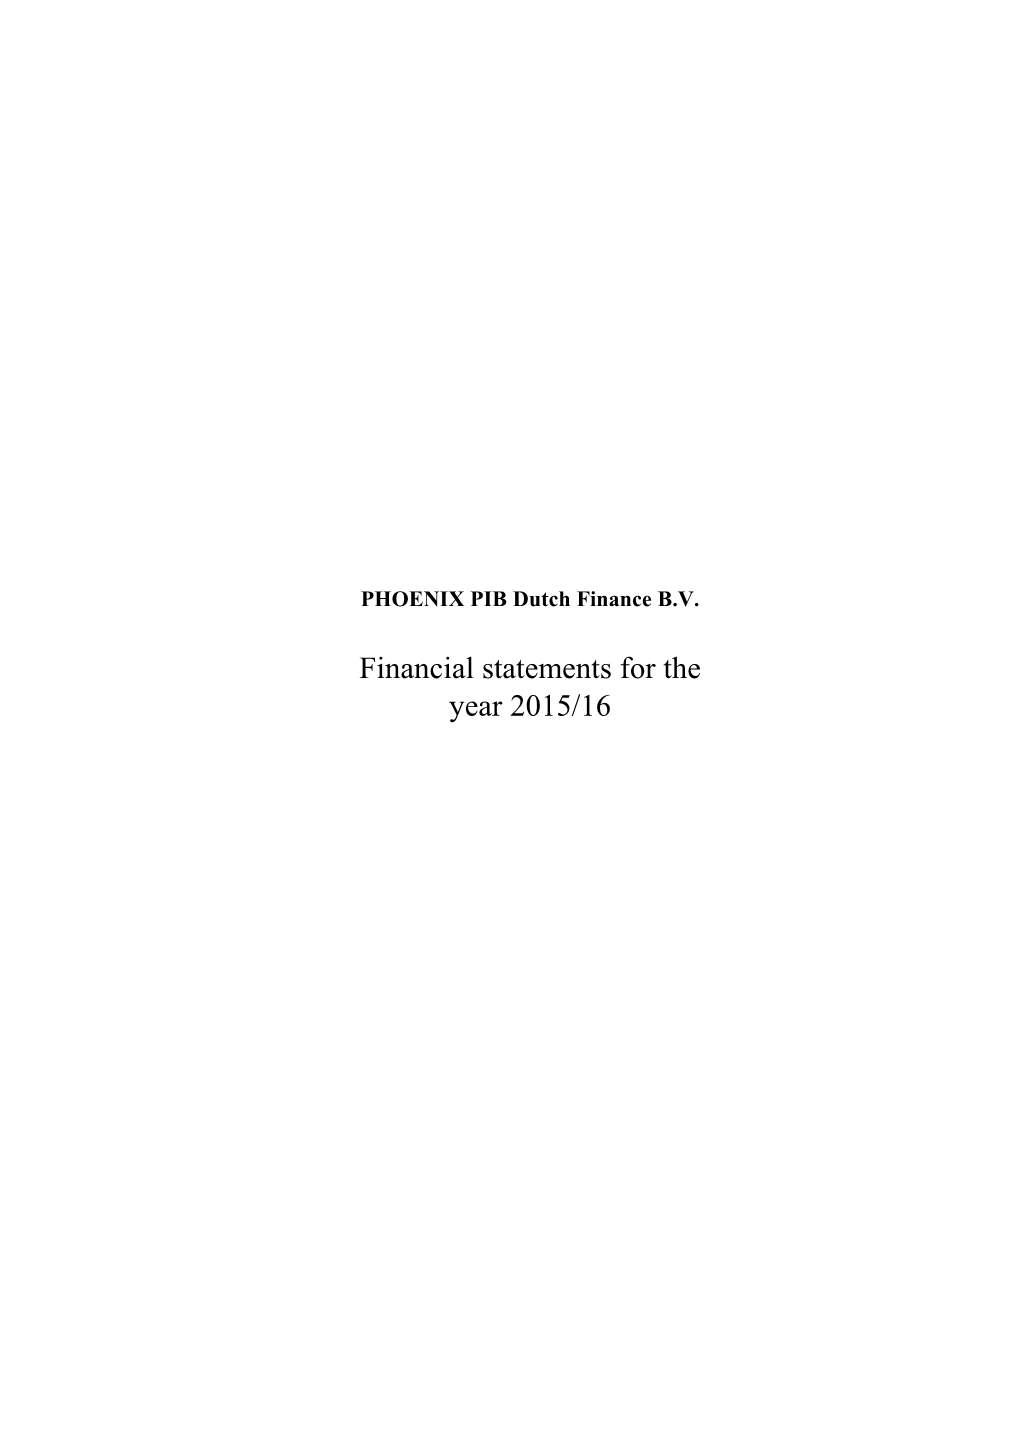 Financial Statements for the Year 2006/2007